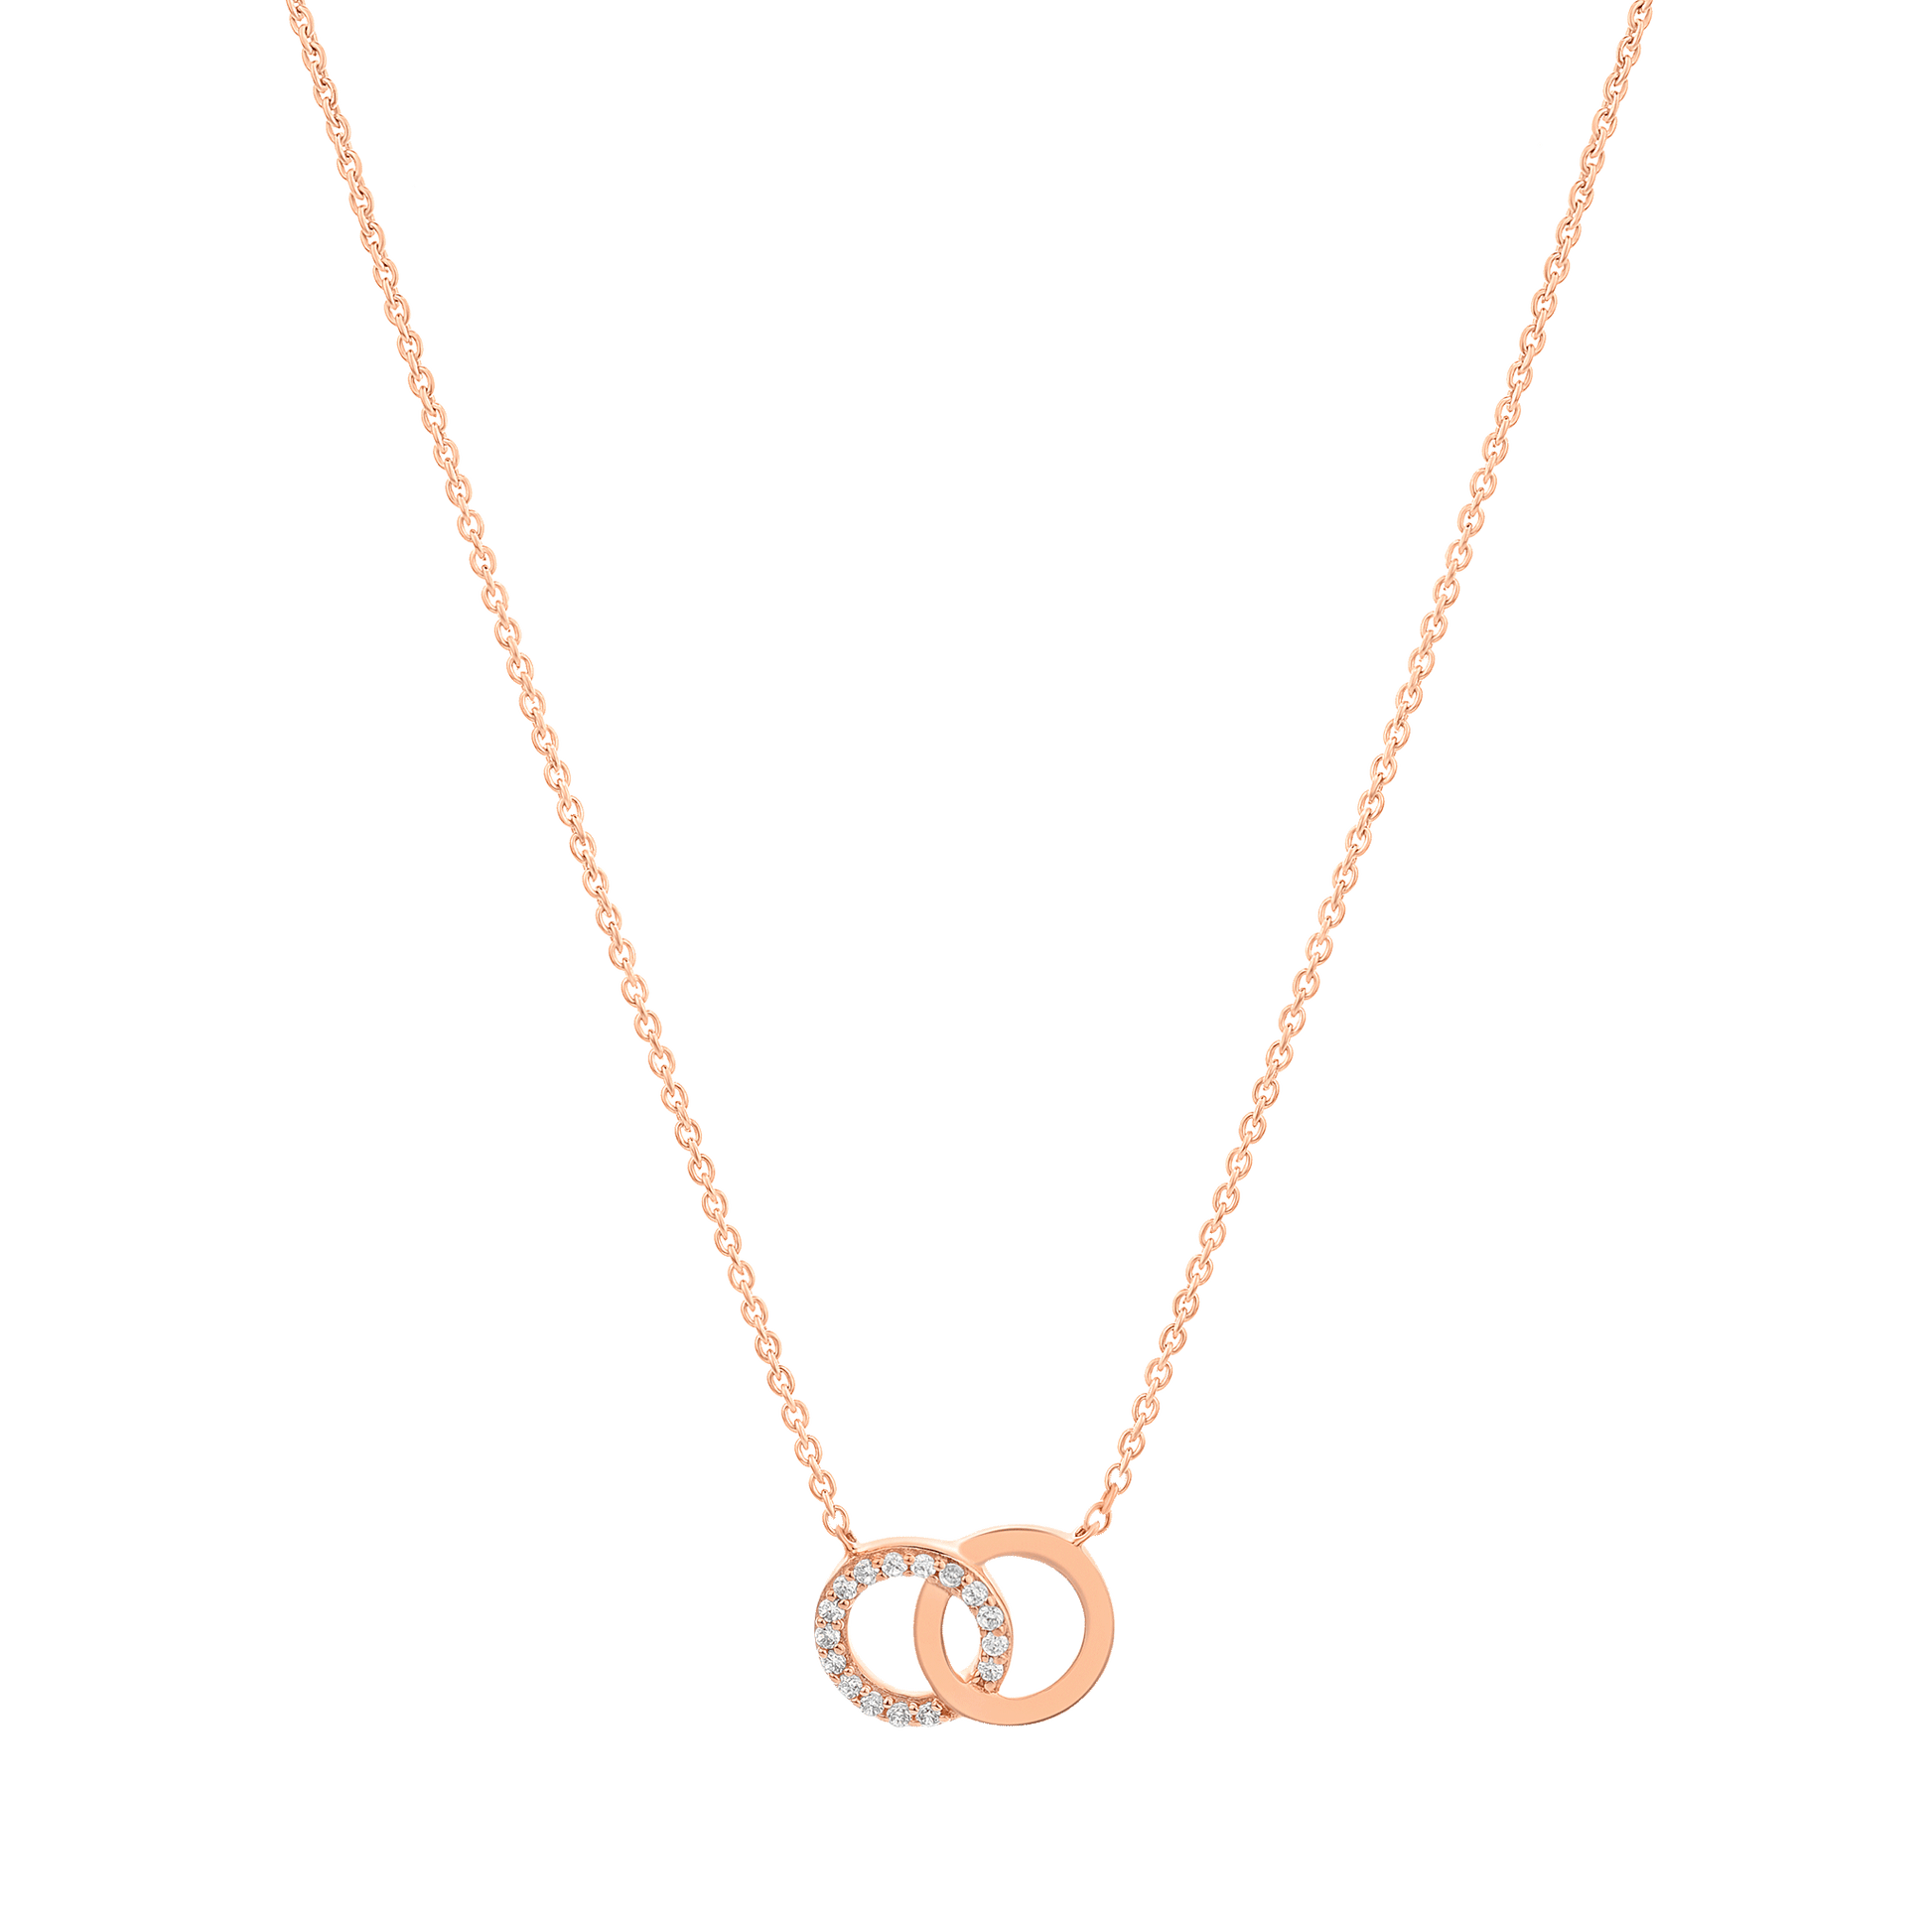 Eternity Necklace - 14K White Gold magal-dev 